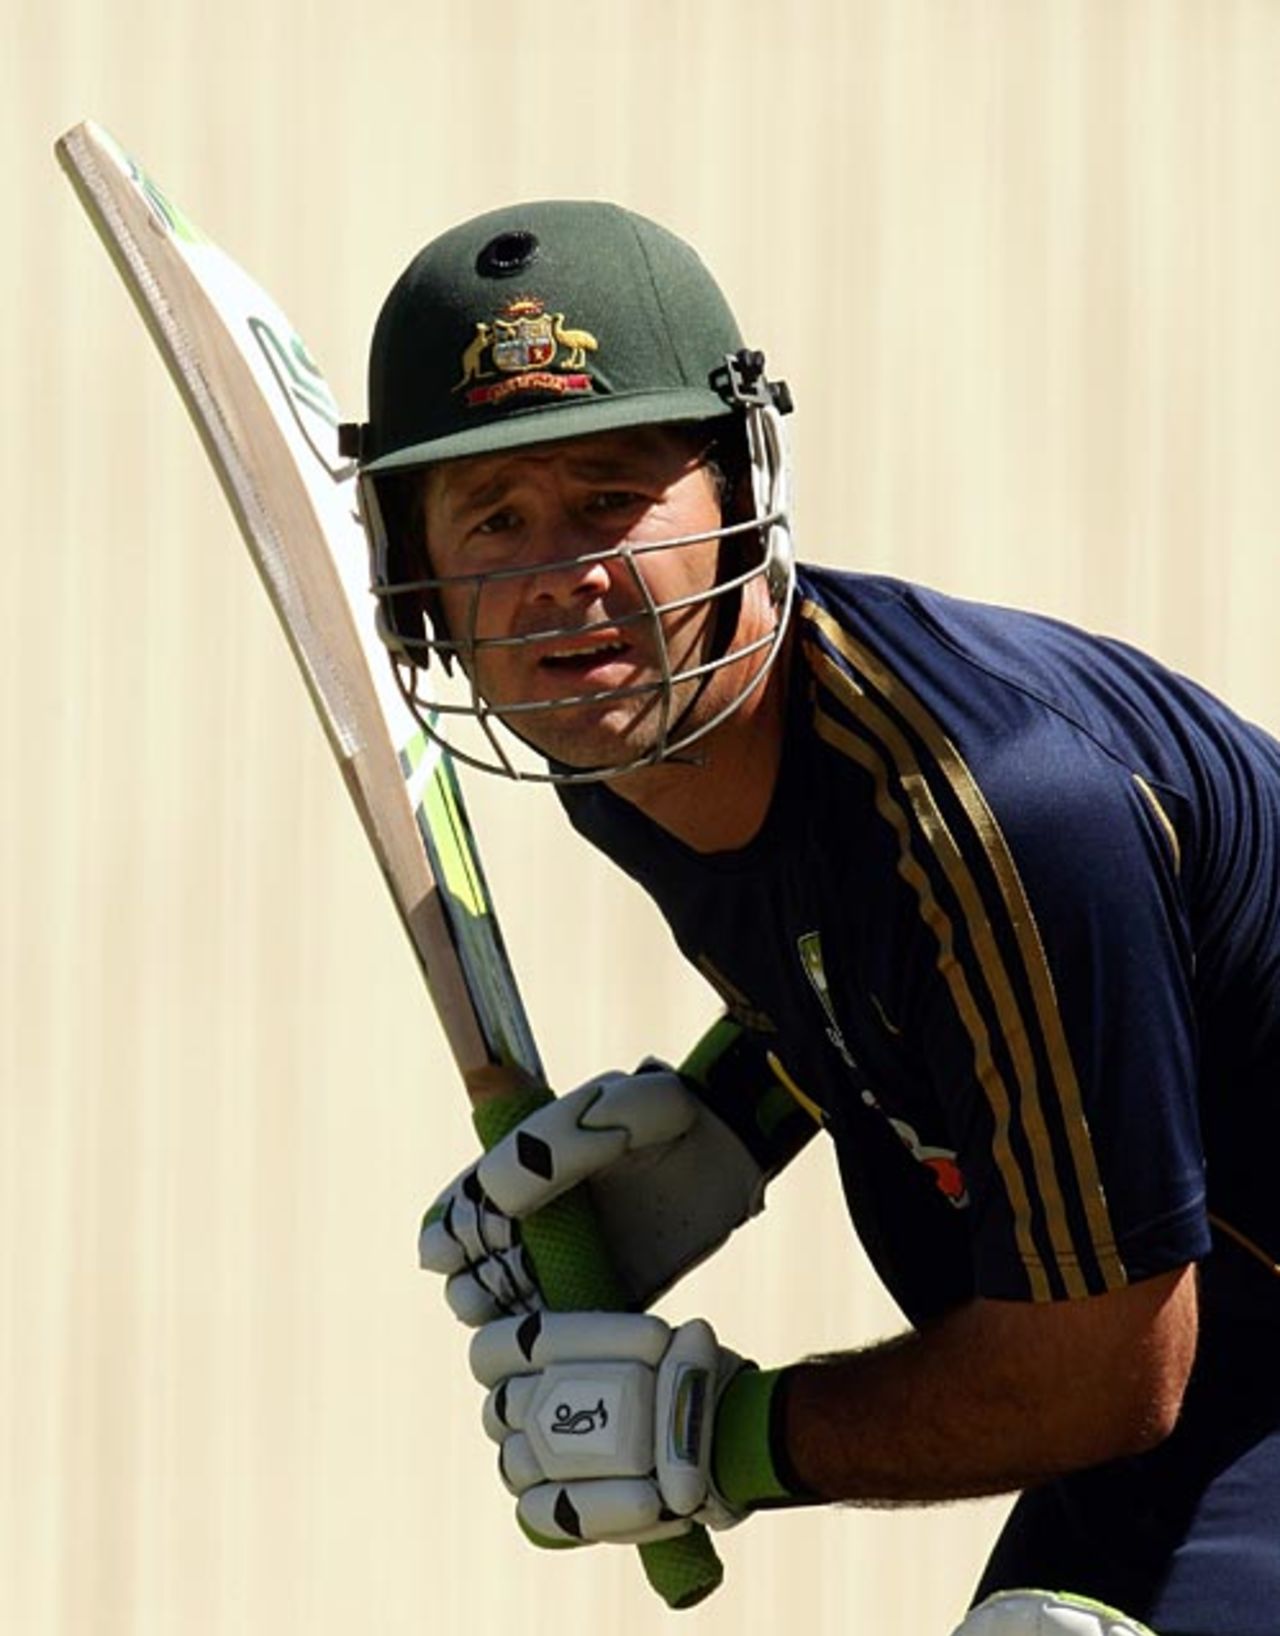 Ricky Ponting concentrates hard at the nets, Adelaide, November 27, 2008